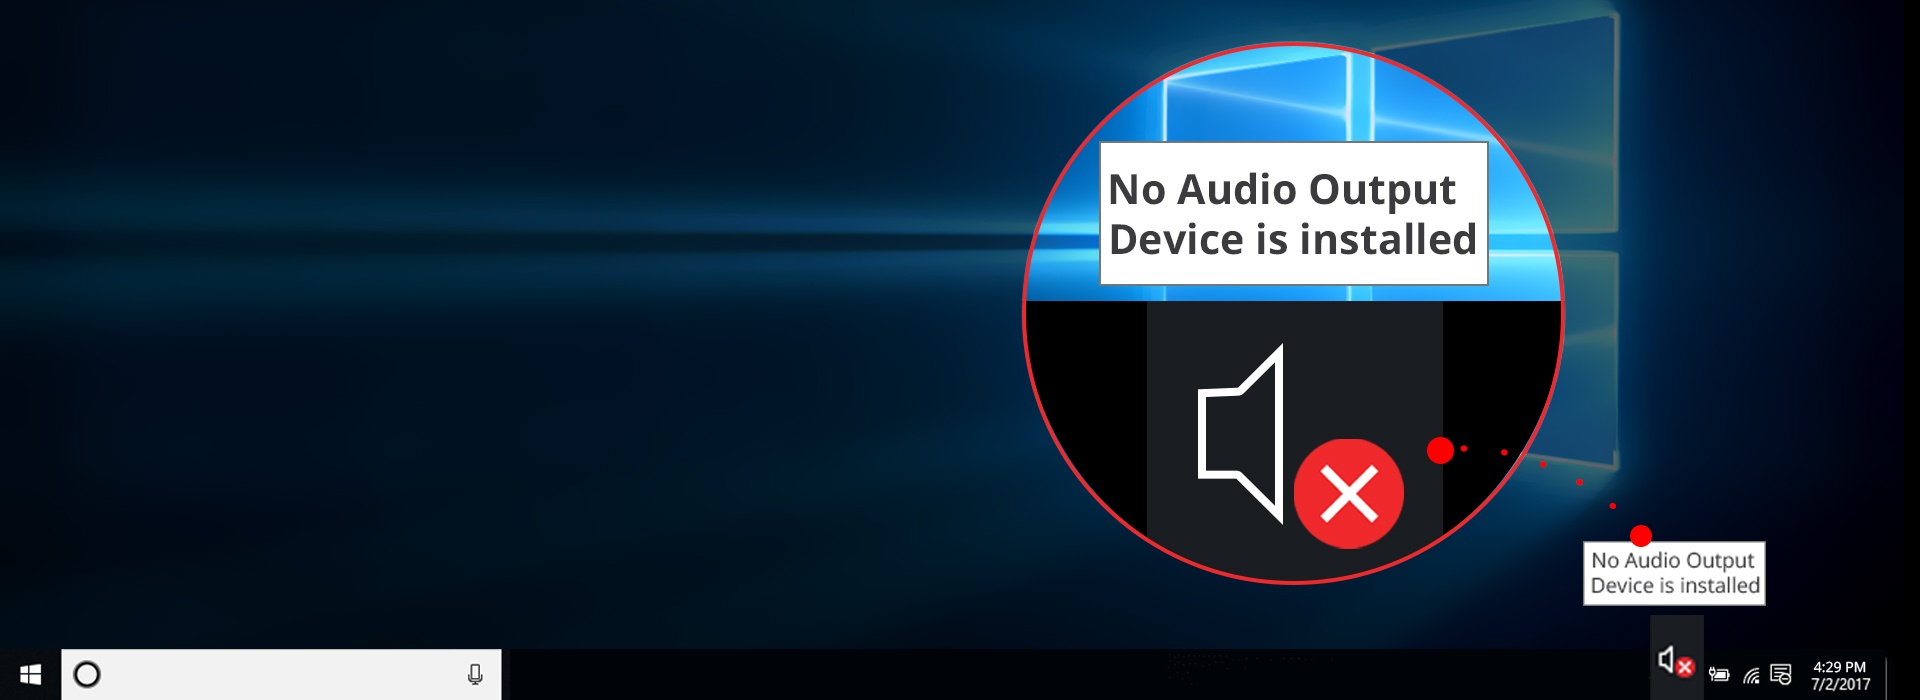 free audio output device for laptop